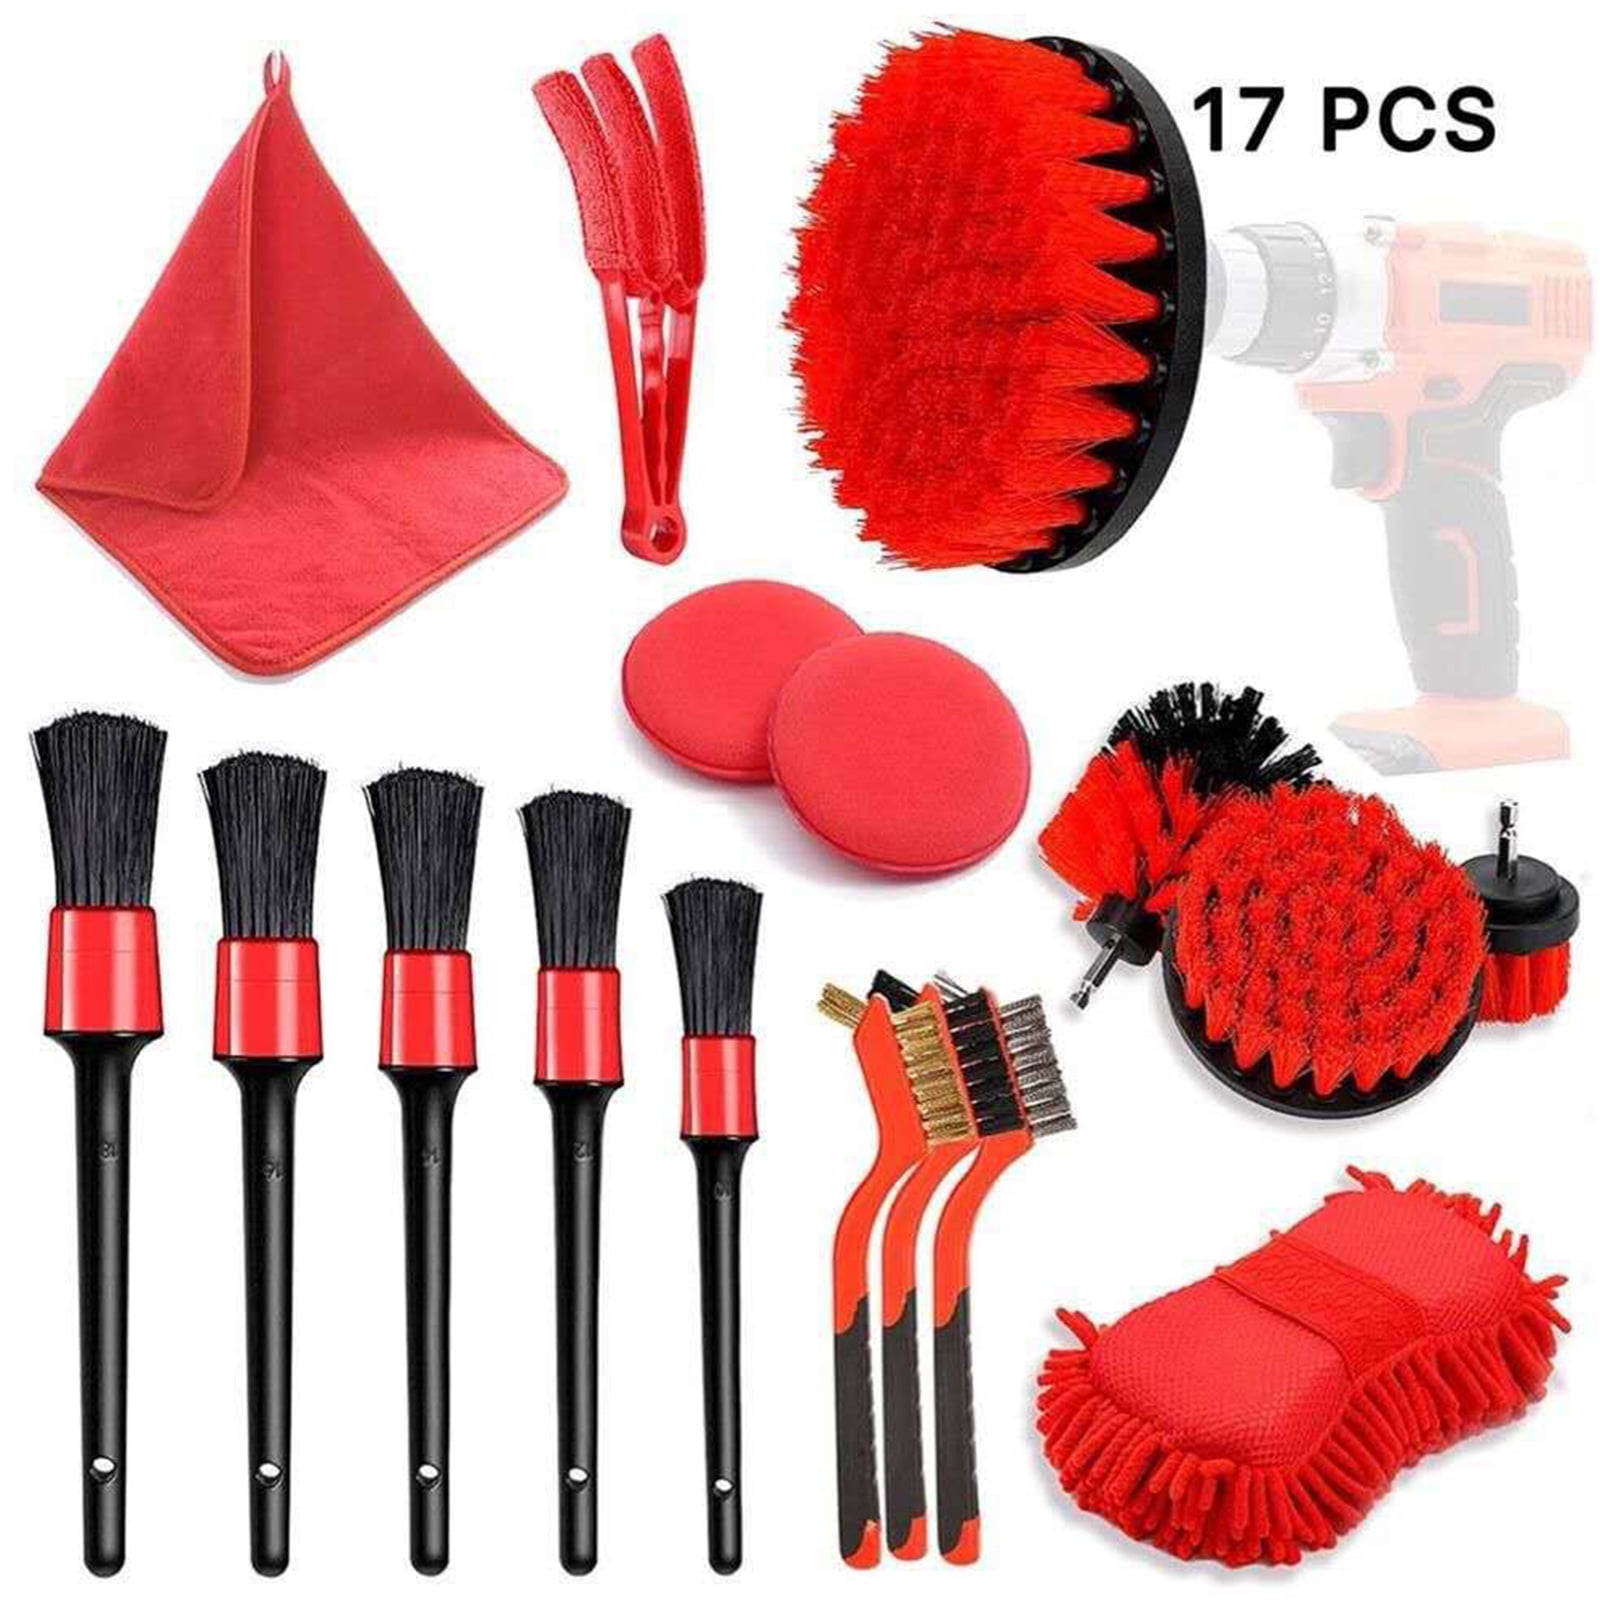 Pcs Crevice Cleaning Brush, 2023 New Multifunctional Gap Cleaning